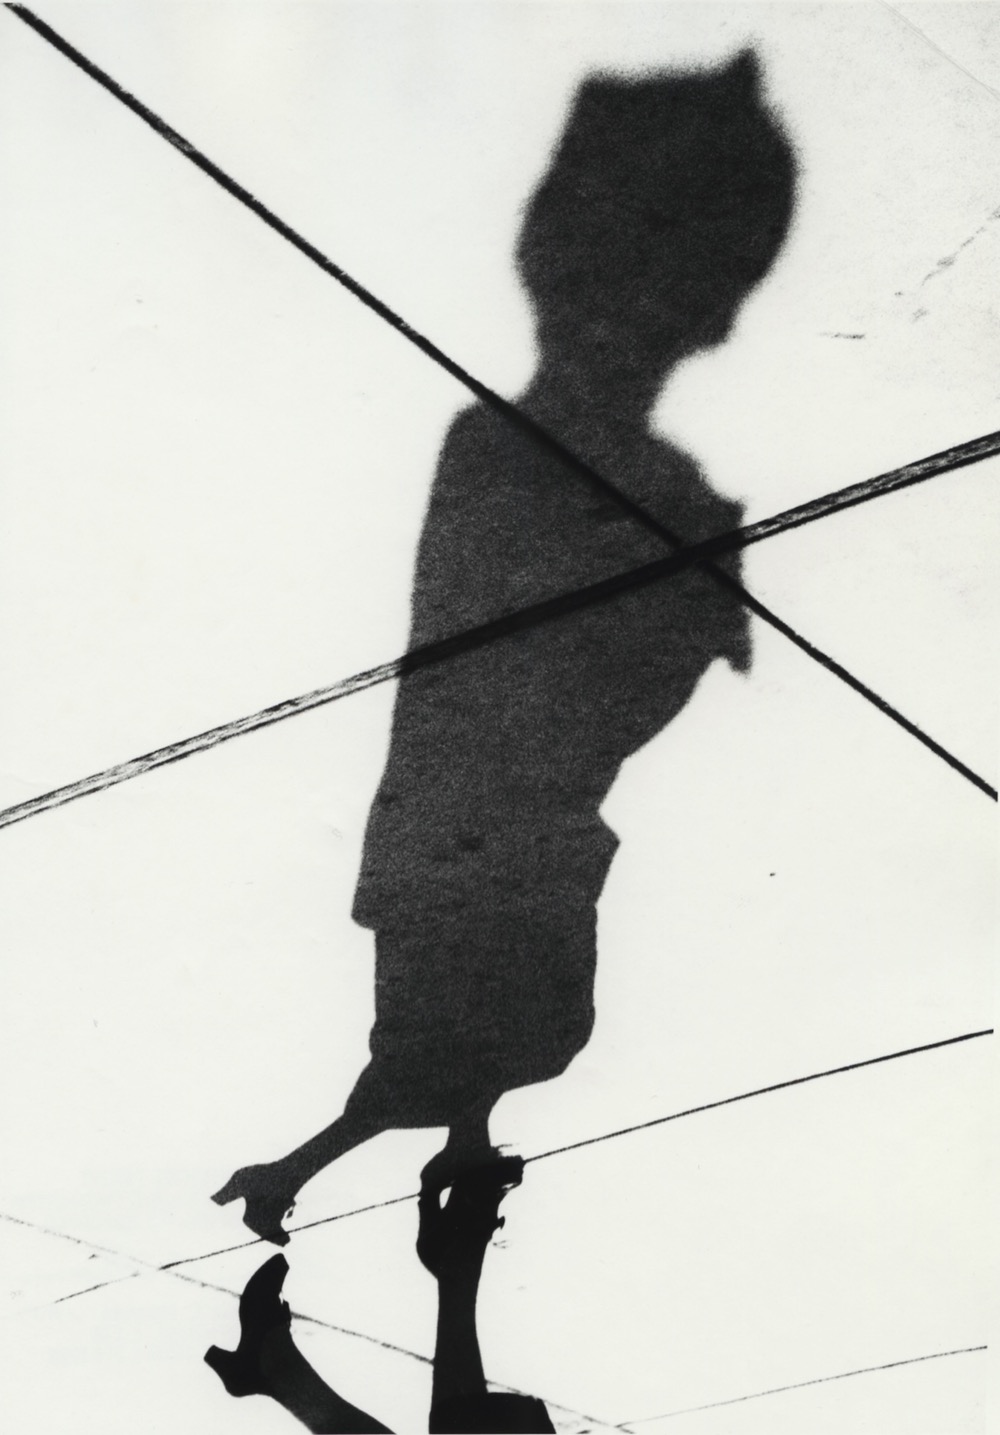 Woman in High Heels, Shadow Series, Chicago, 1951